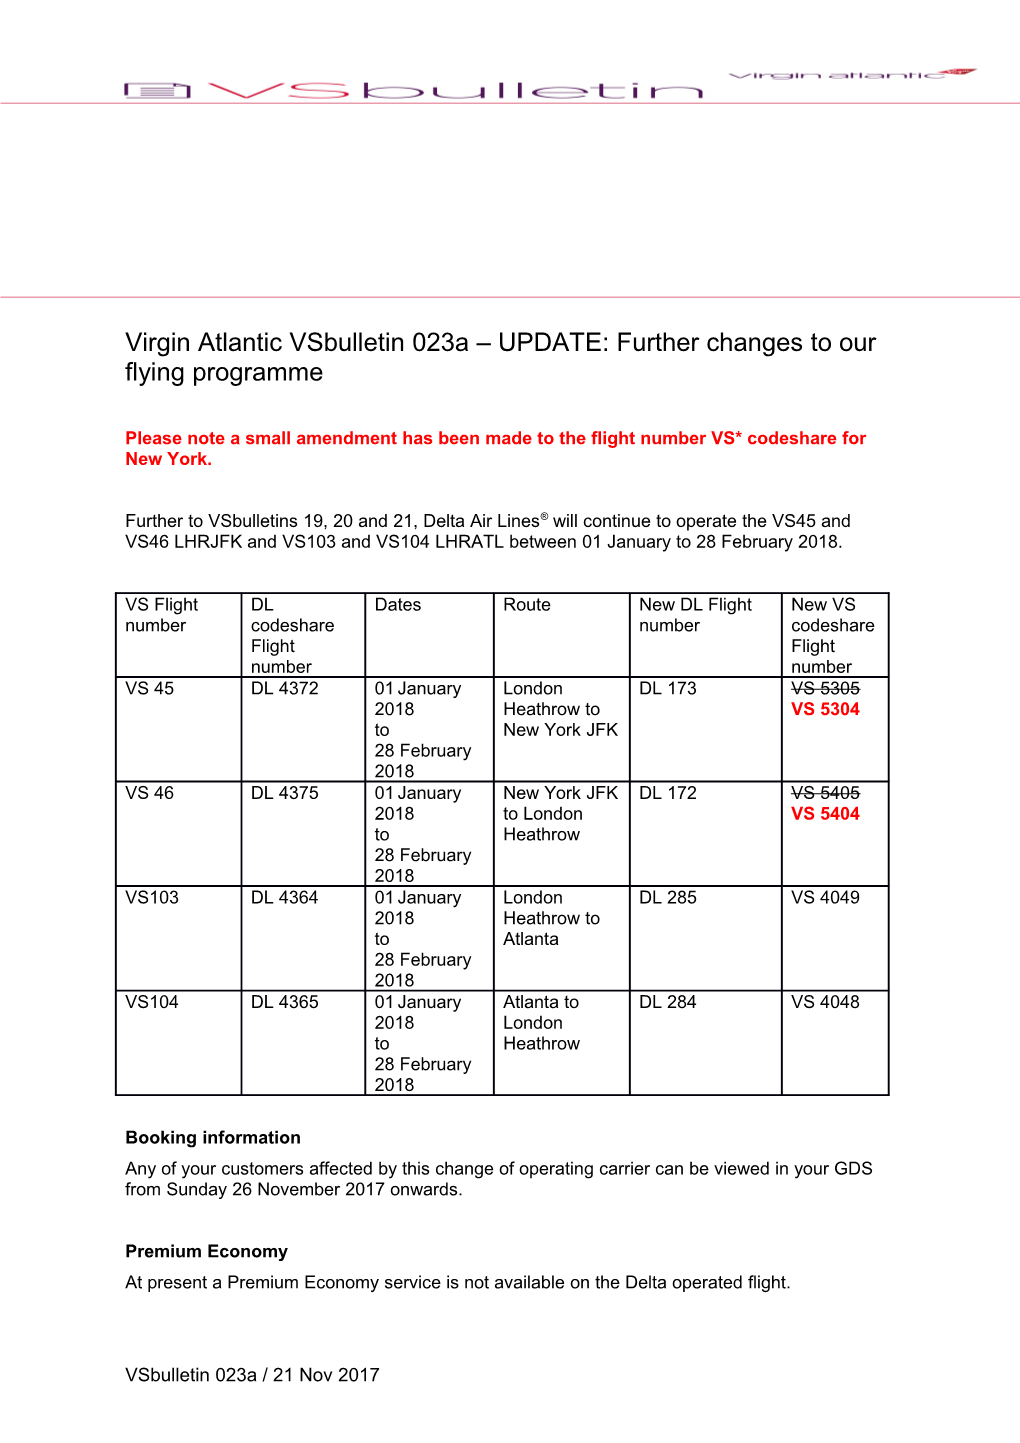 Virgin Atlantic Vsbulletin 023A UPDATE: Further Changes to Our Flying Programme